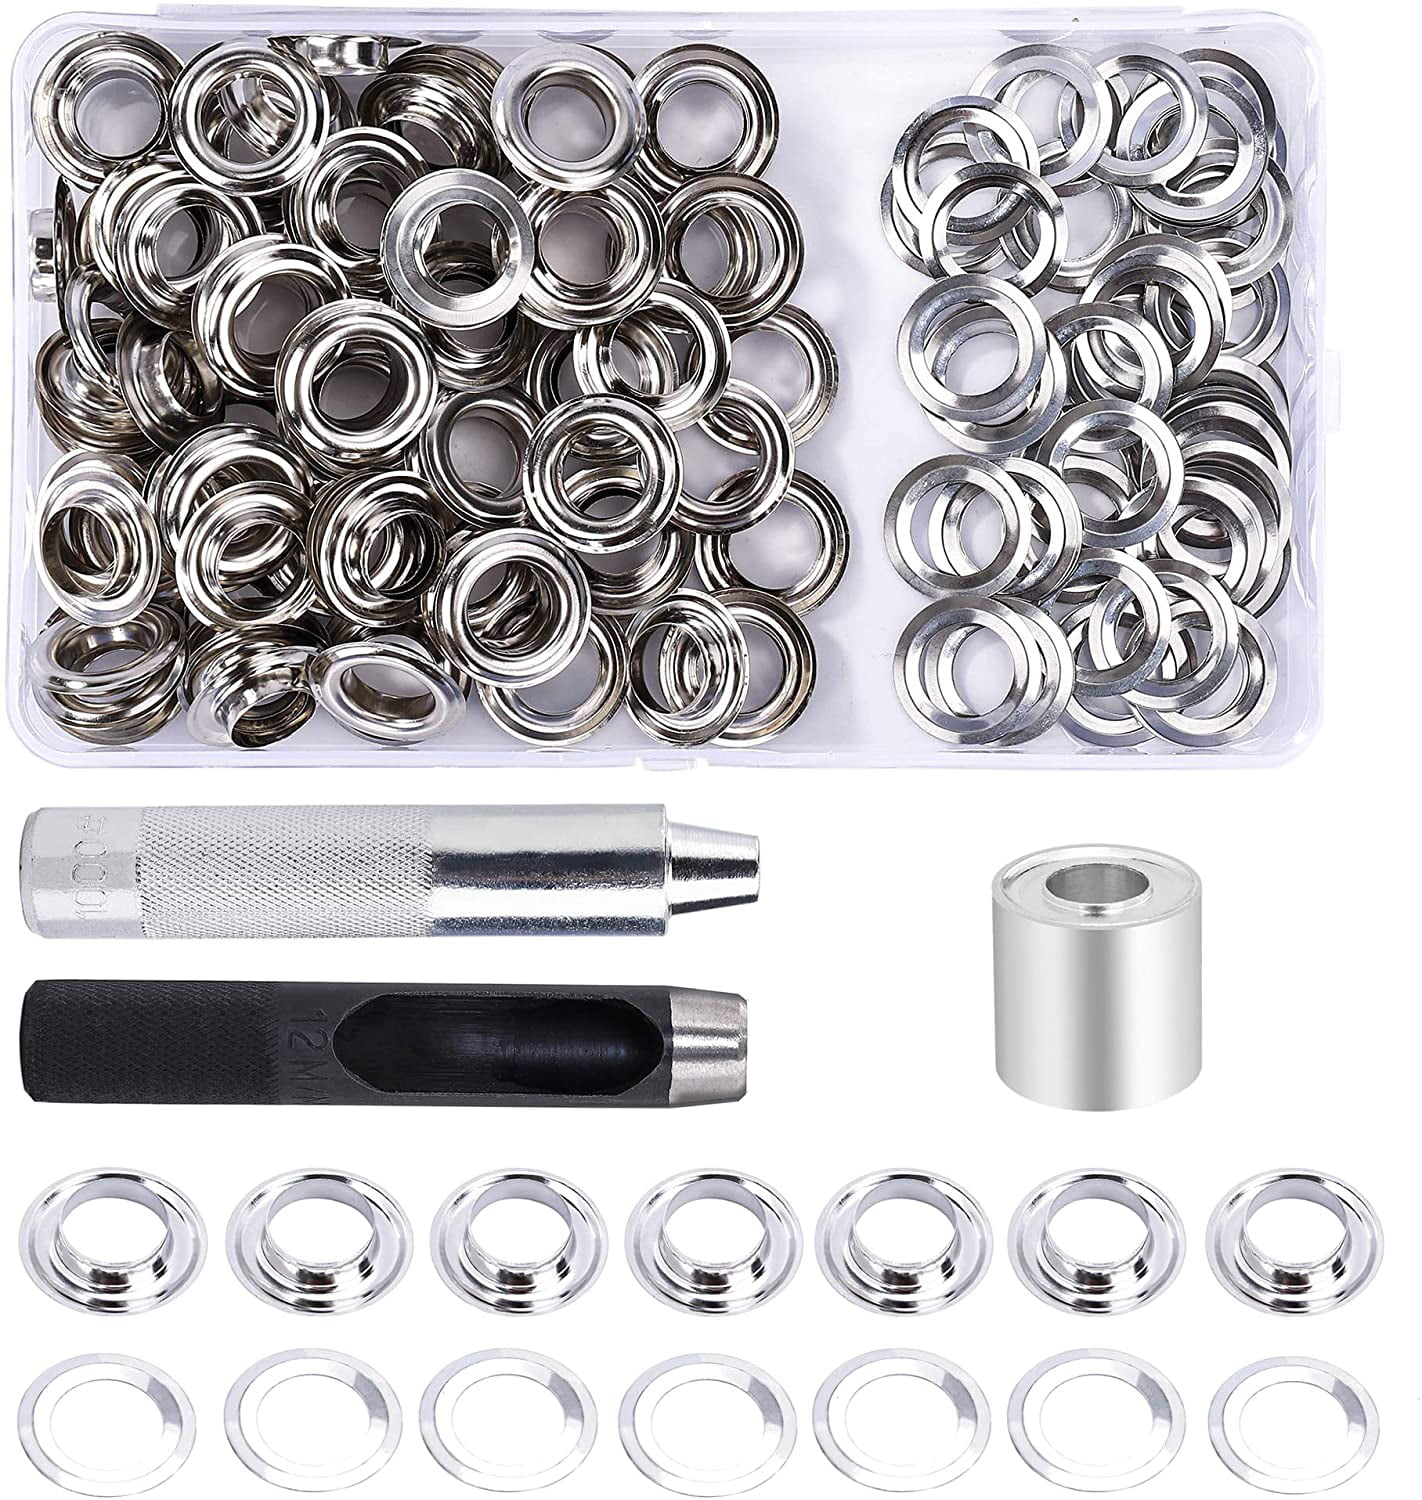 100 Sets 2/5 Inch Grommet Kit With Brass Eyelet,Install Tools in Storage Case